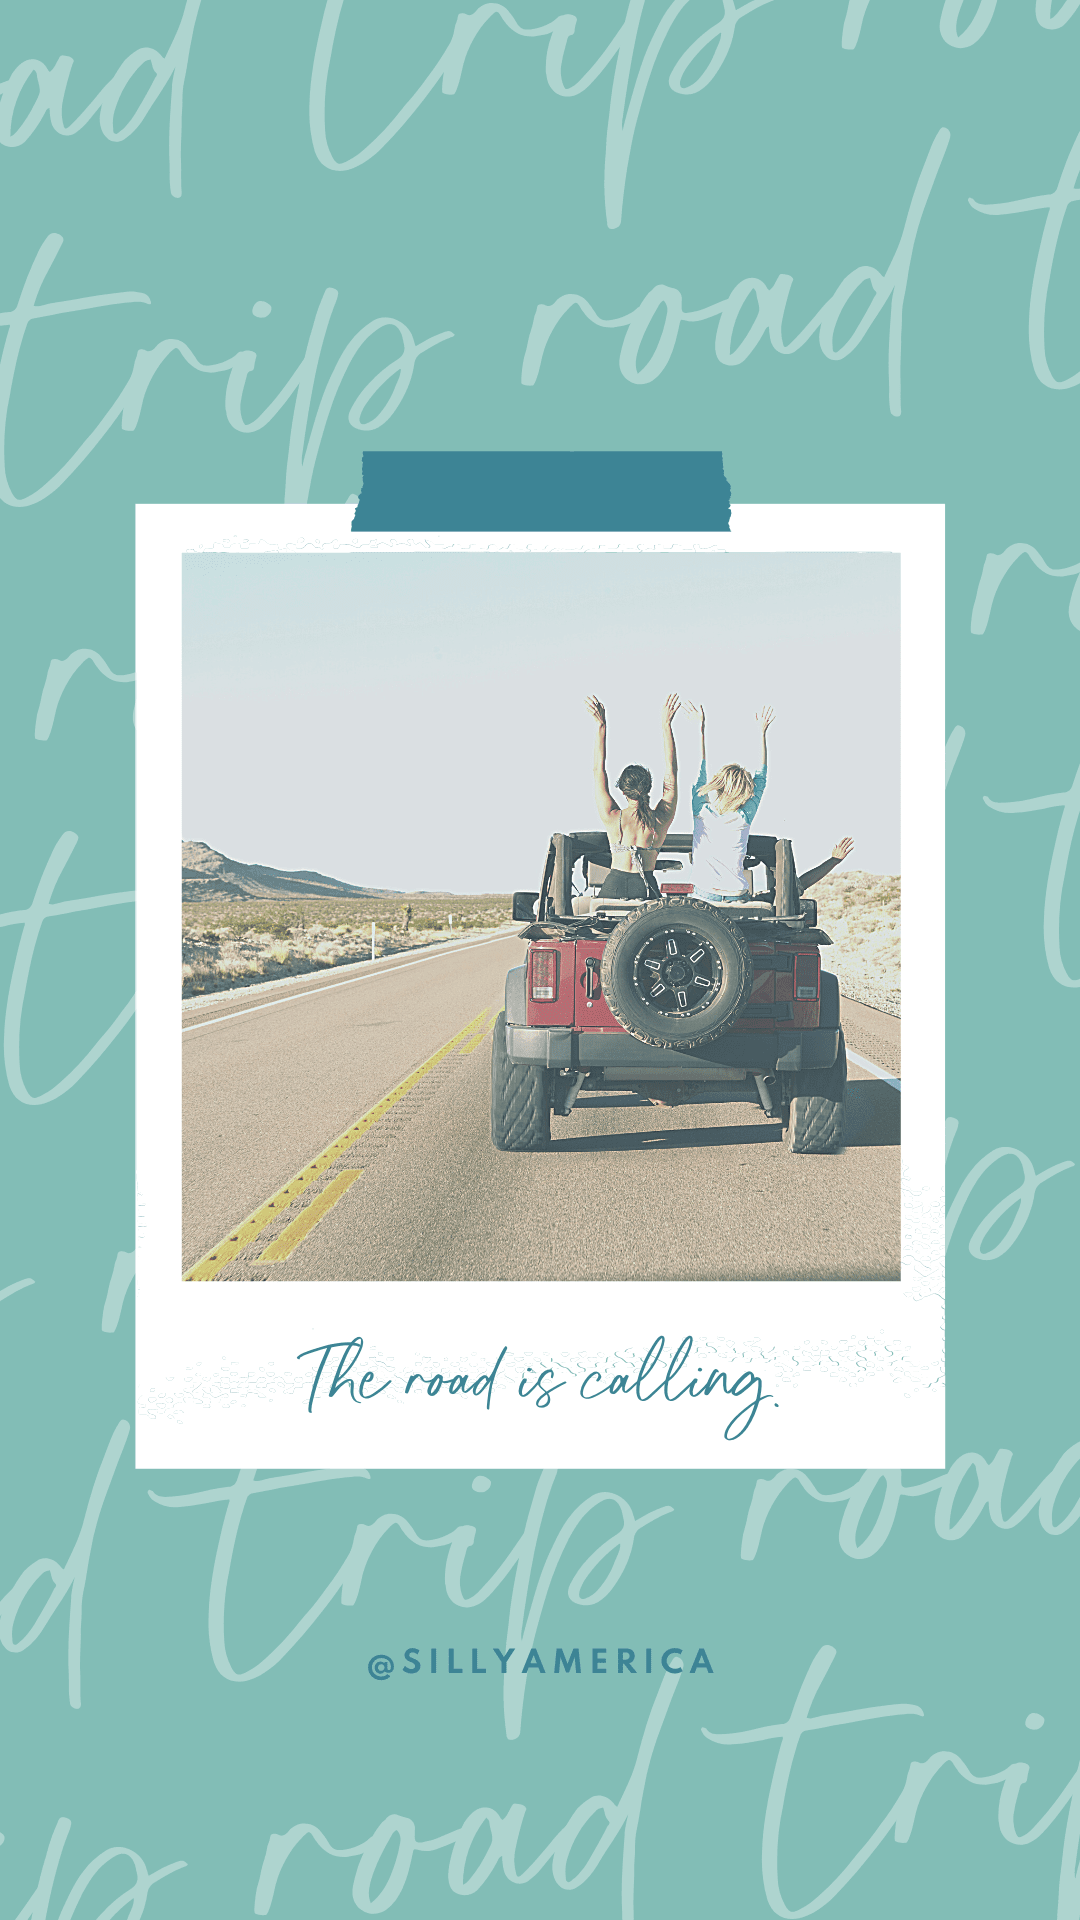 The road is calling. - Road Trip Captions for Instagram